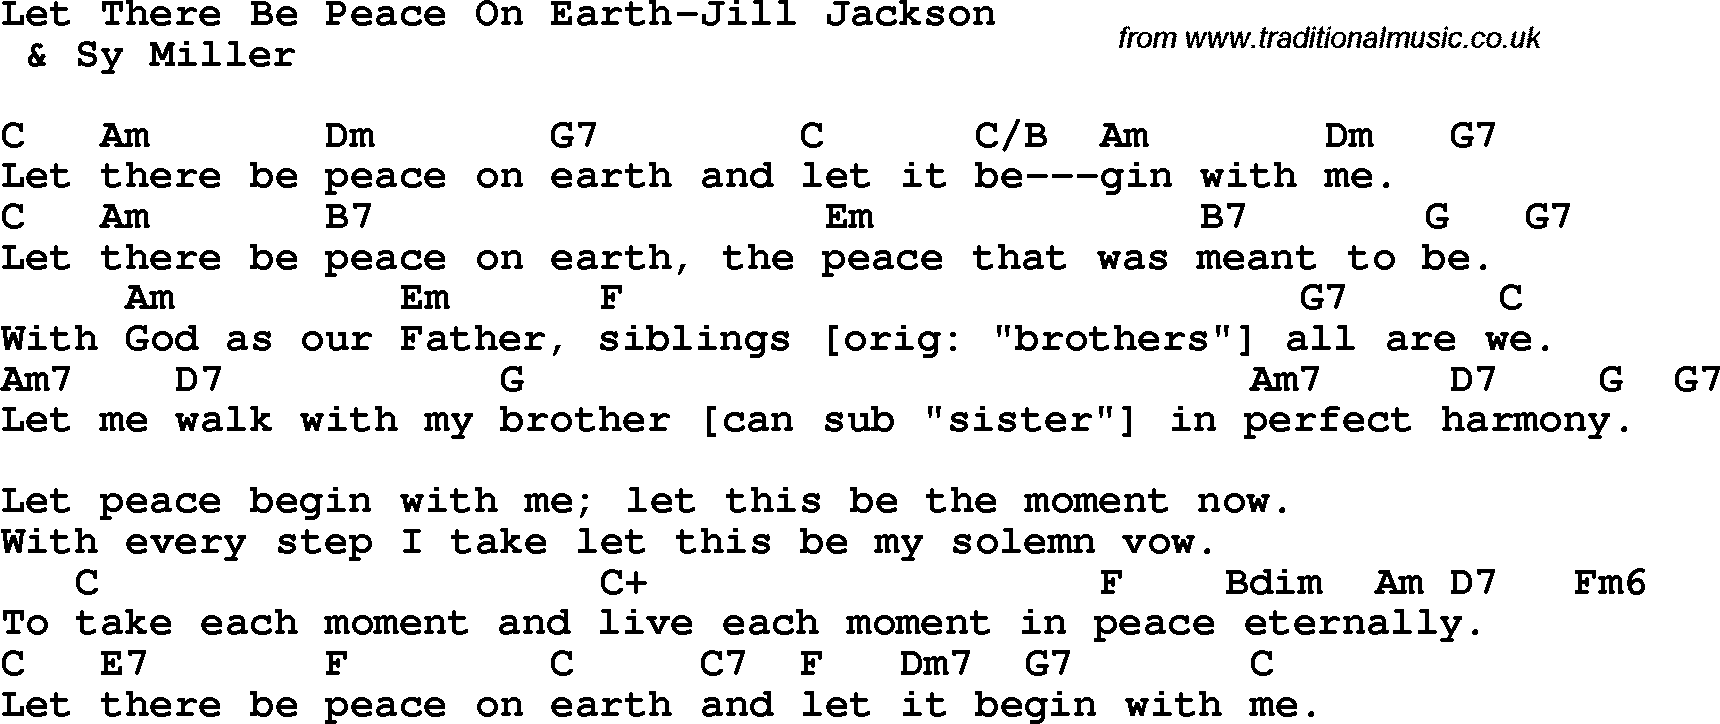 Protest Song Let There Be Peace On Earth-Jill Jackson lyrics and chords